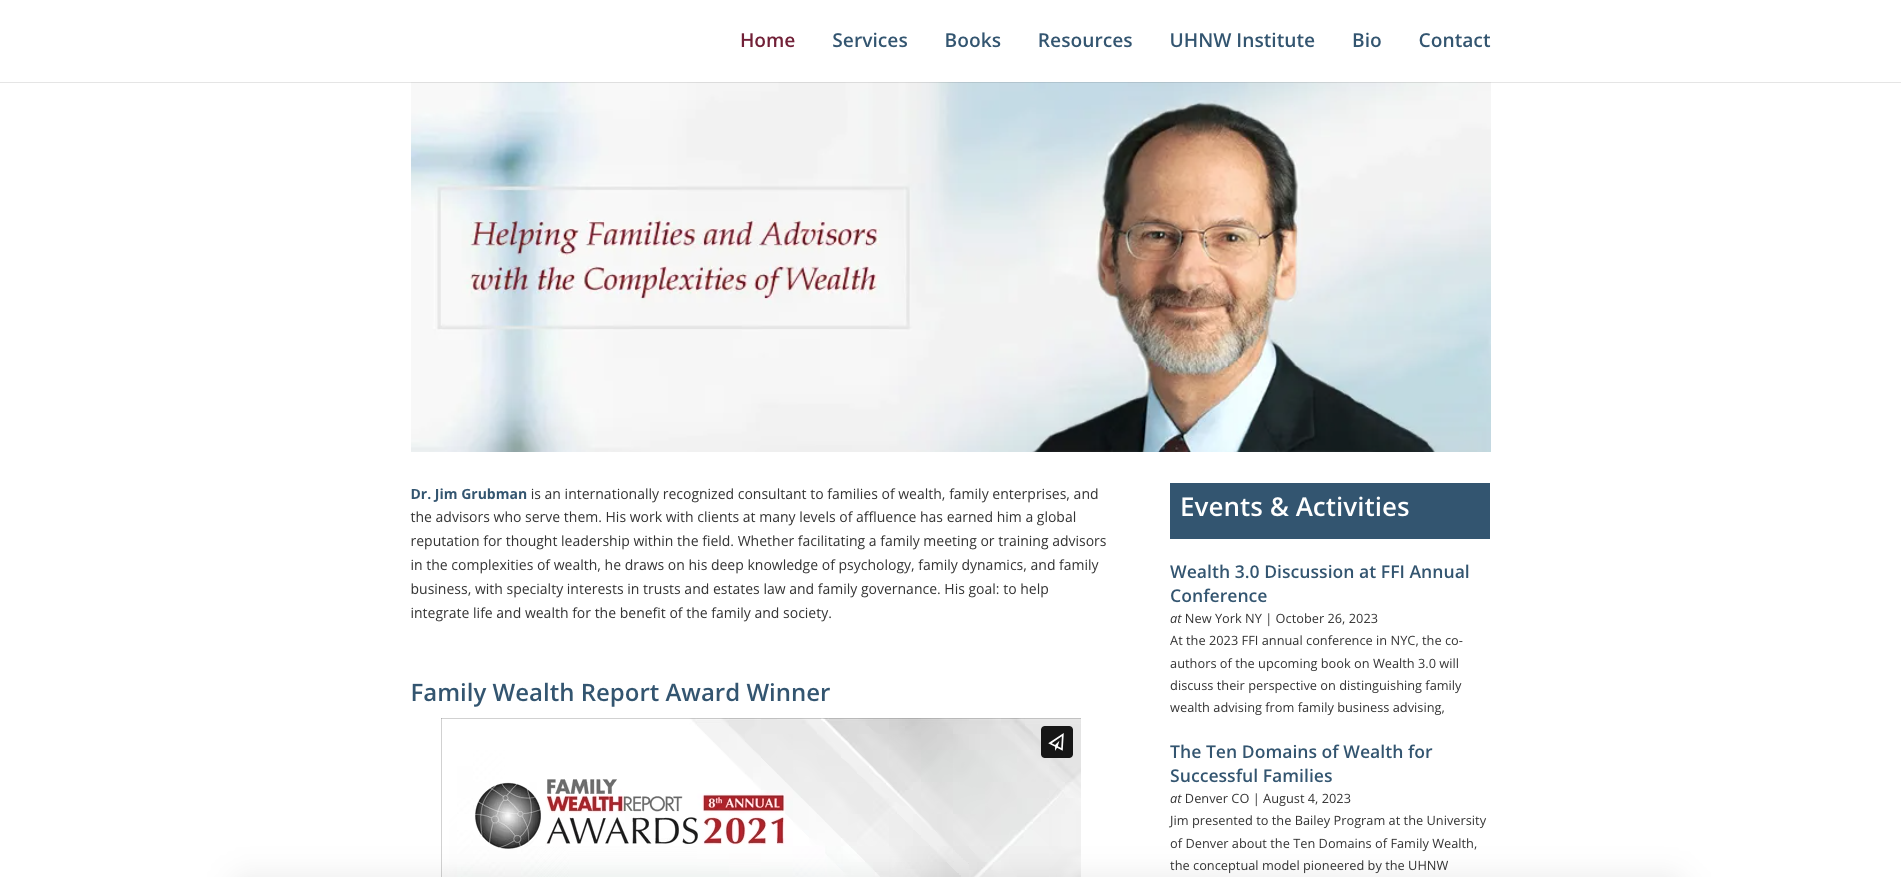 Dr. Jim Grubman: Family Wealth Consulting